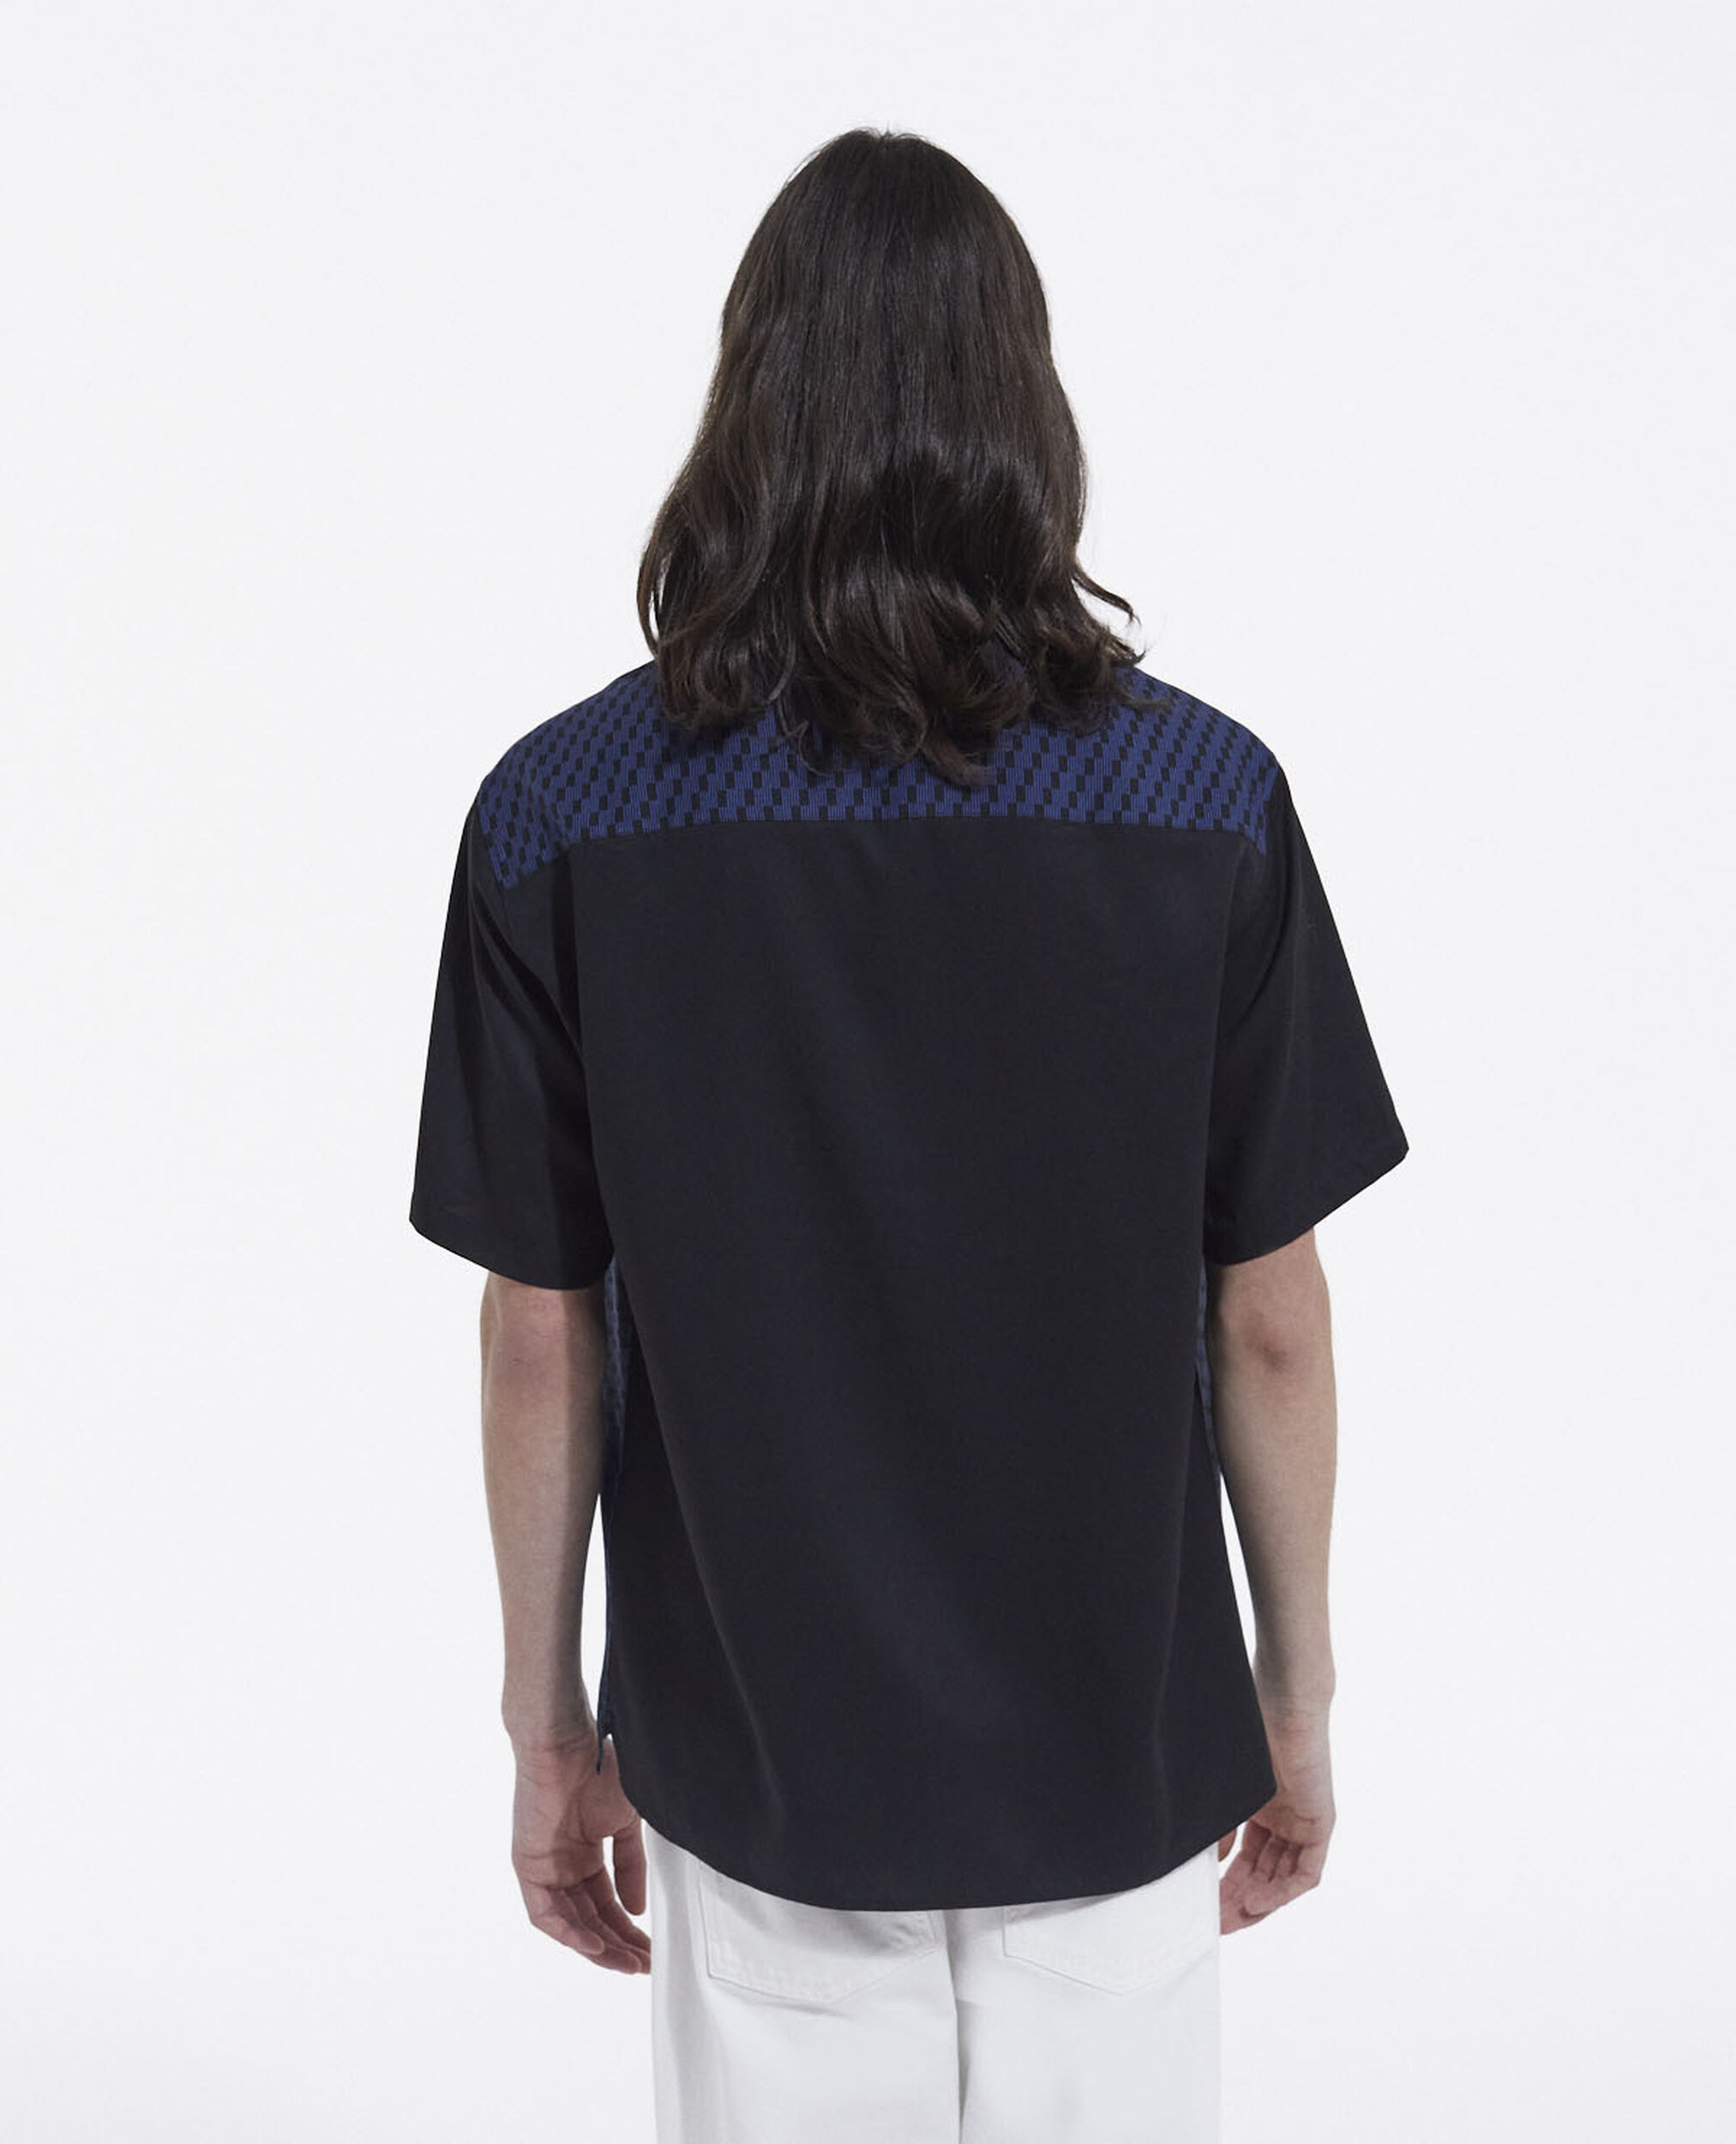 Chic black and blue shirt with short sleeves, BLACK BLUE, hi-res image number null